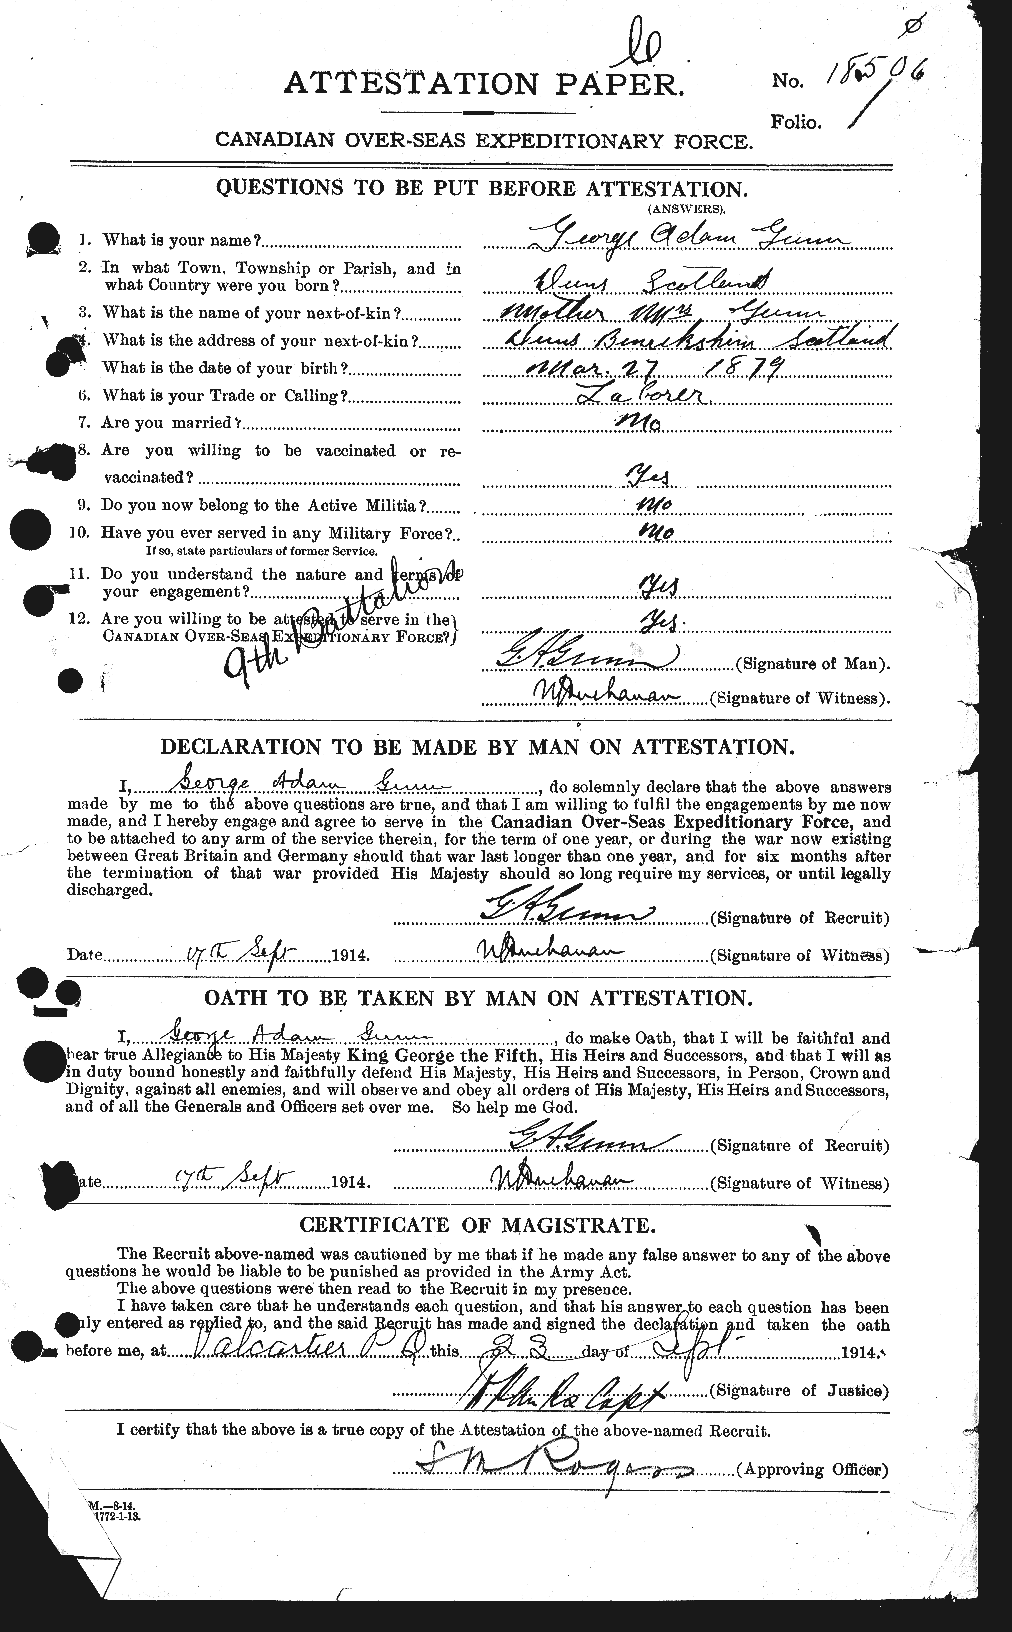 Personnel Records of the First World War - CEF 369238a